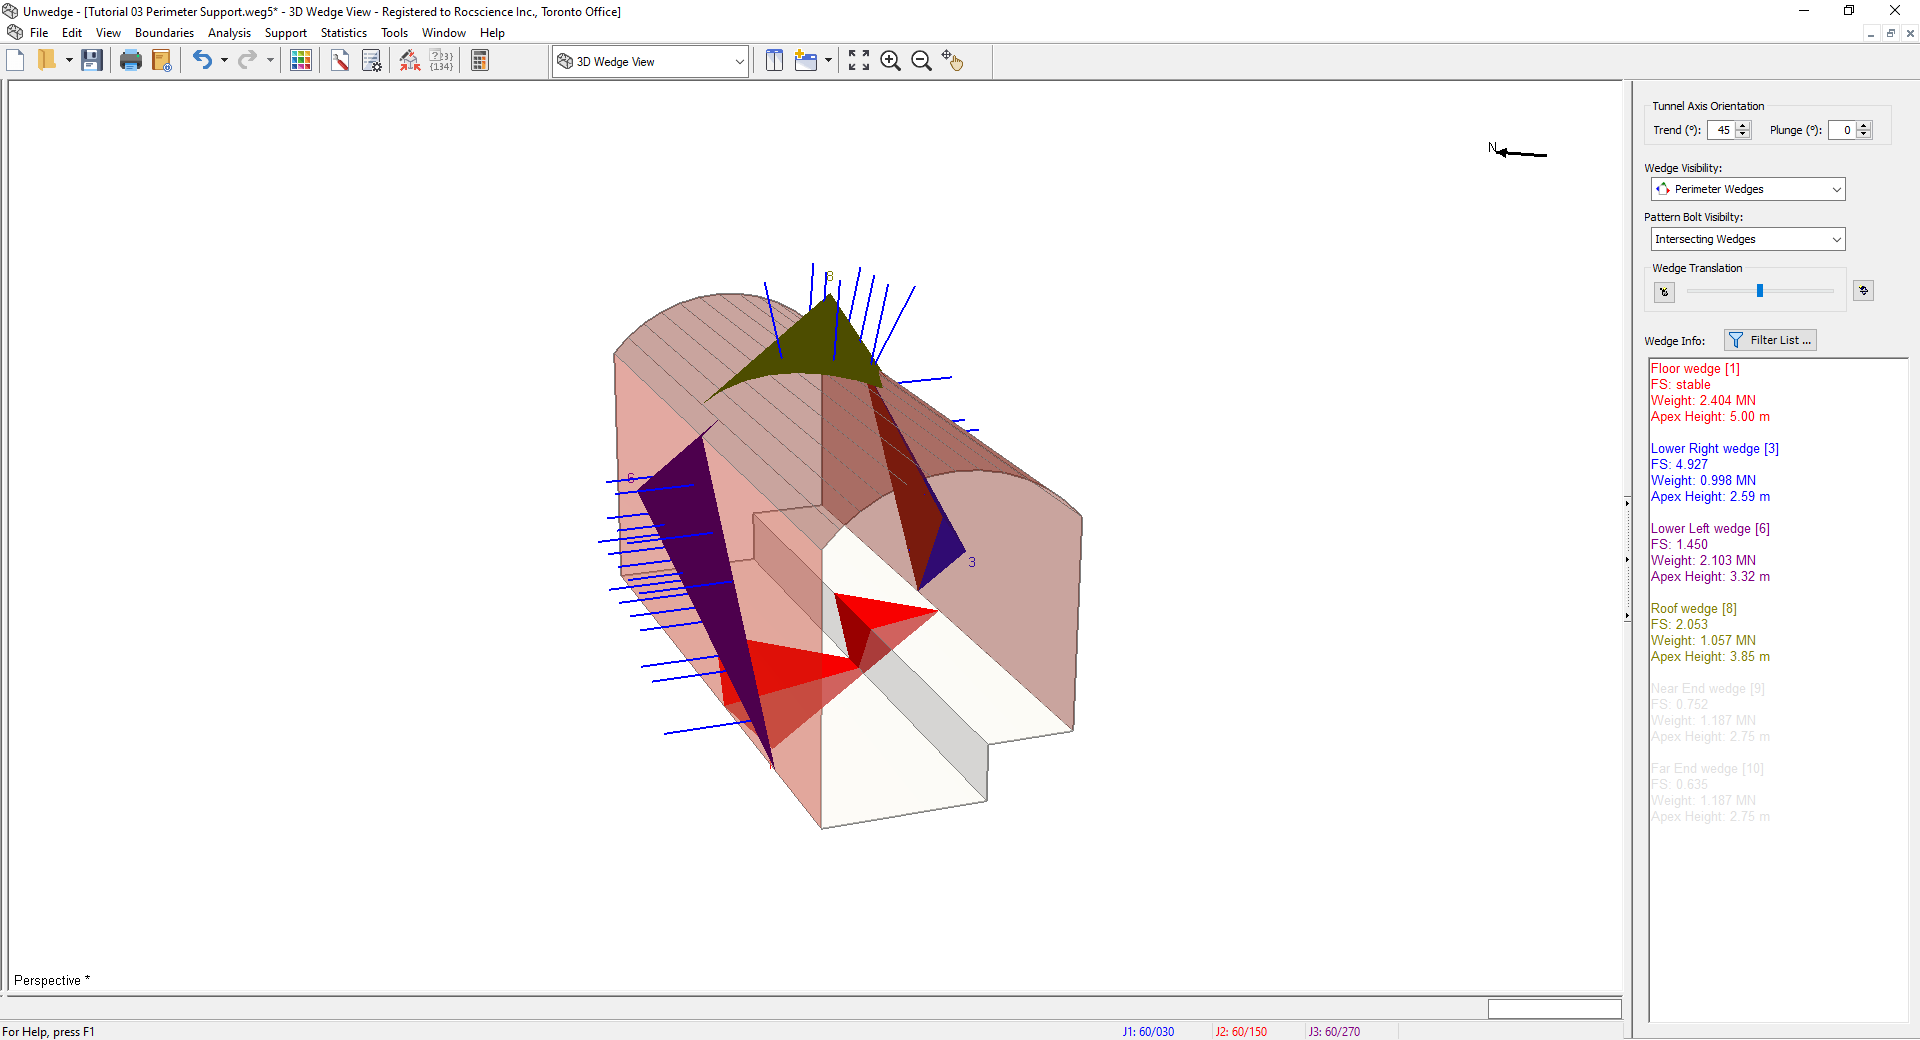 3D Wedge Model View